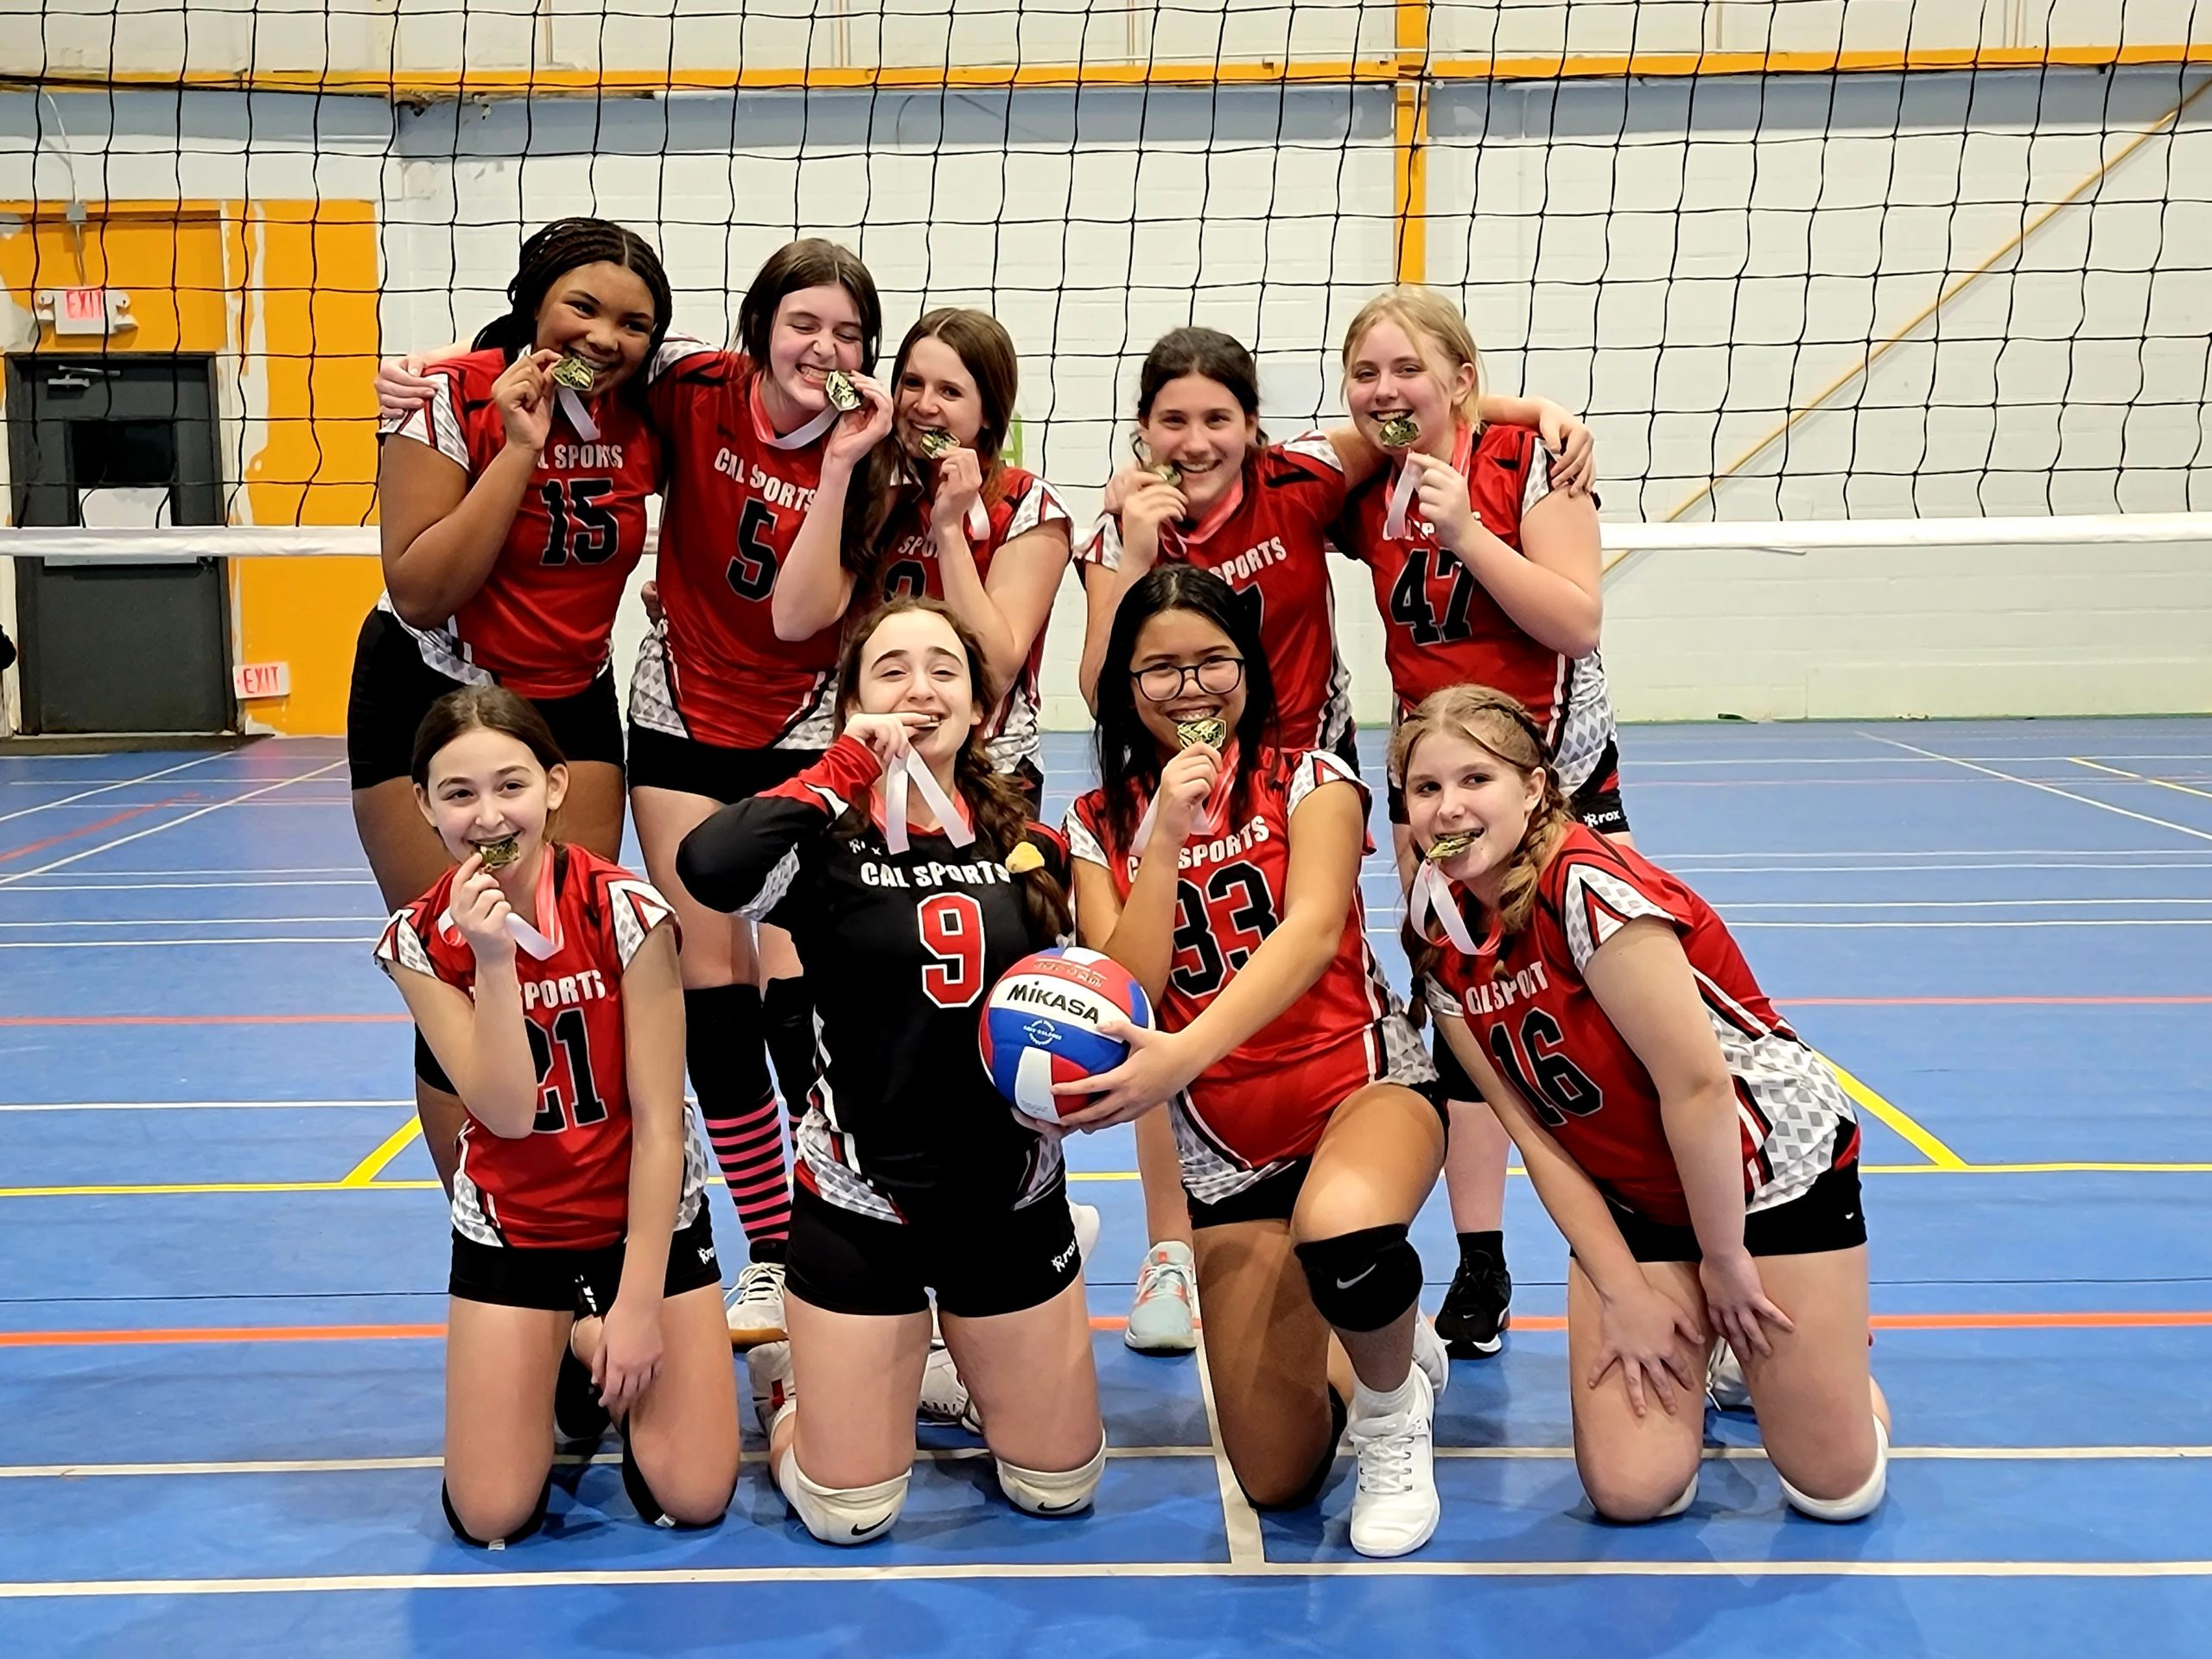 girls volleyball team on court with medals